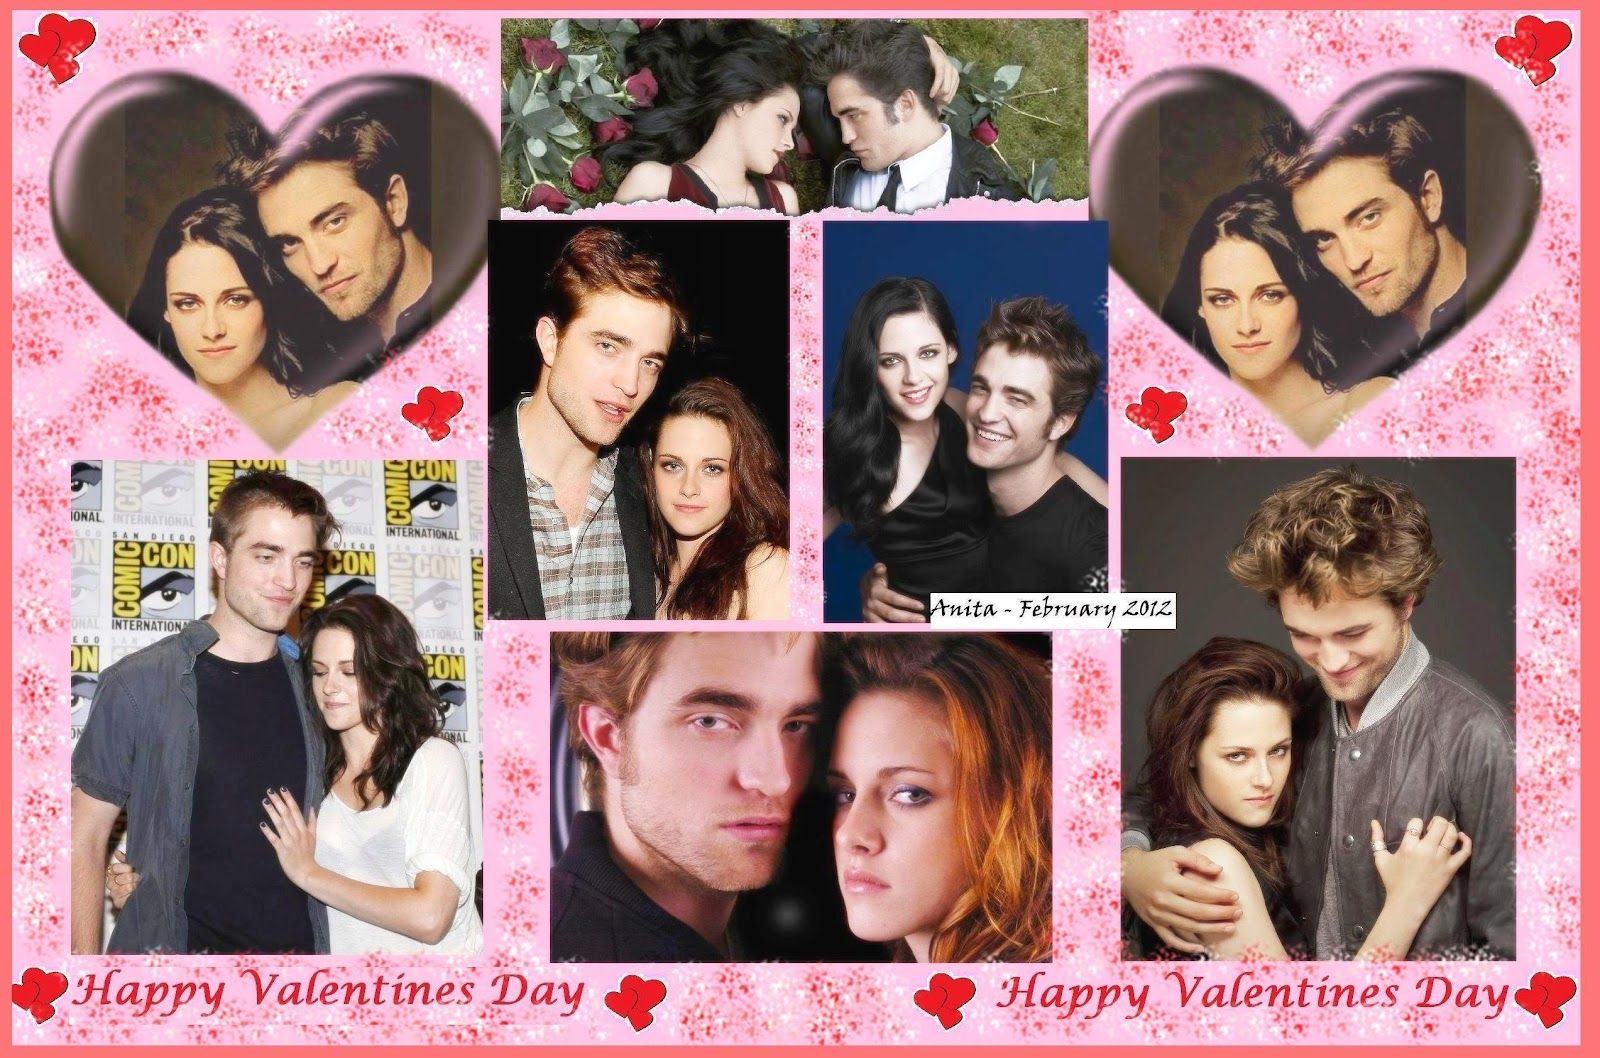 Robert and Kristen Collages: Happy Valentine's Day Collages